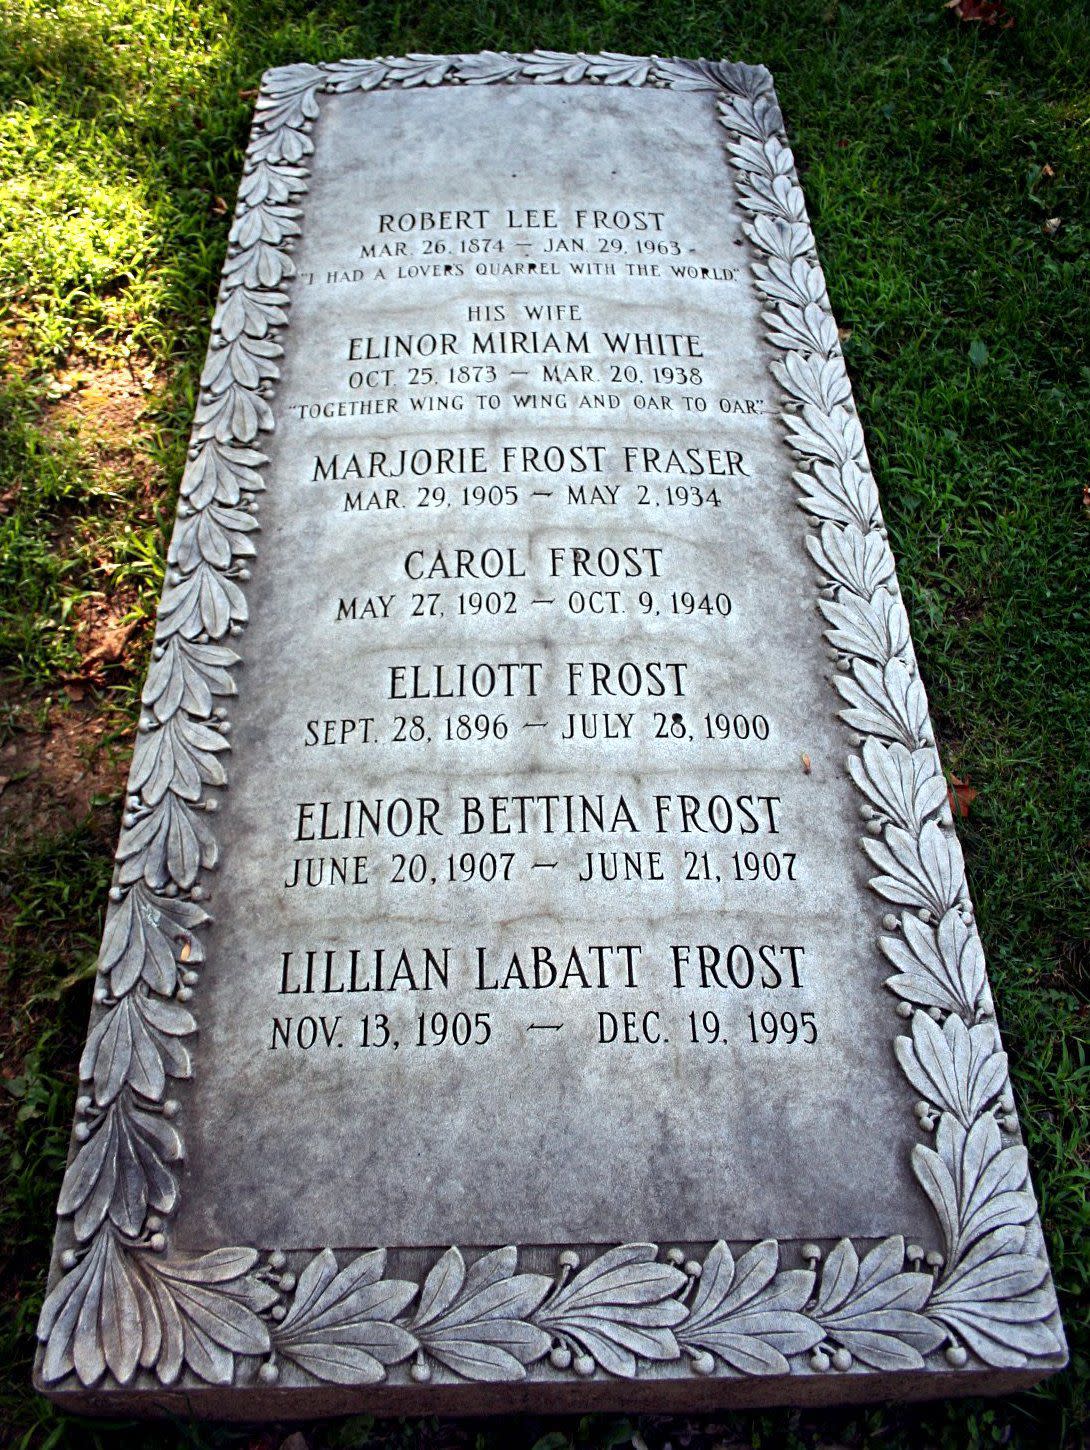 Robert Frost's family grave headstone in the Old Bennington Cemetery, Bennington, Vermont with a list of seven members of the frost family surrounded by grass and light coming in on the right